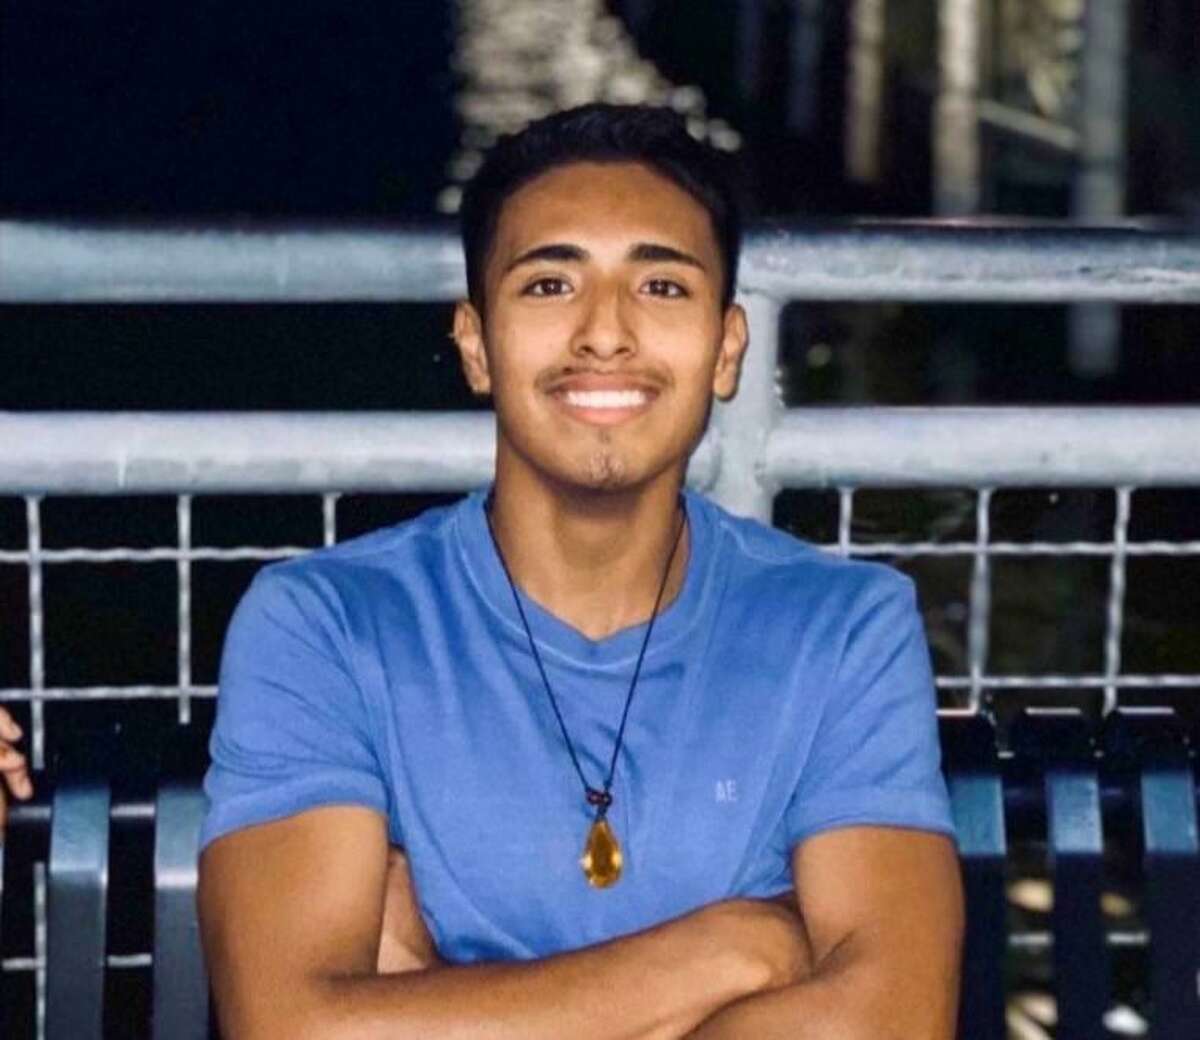 Conroe resident Mario Saucedo Jr., 18, died in a car accident in 2020. His family is trying to recover a necklace of his after it was lost at a local retailer.